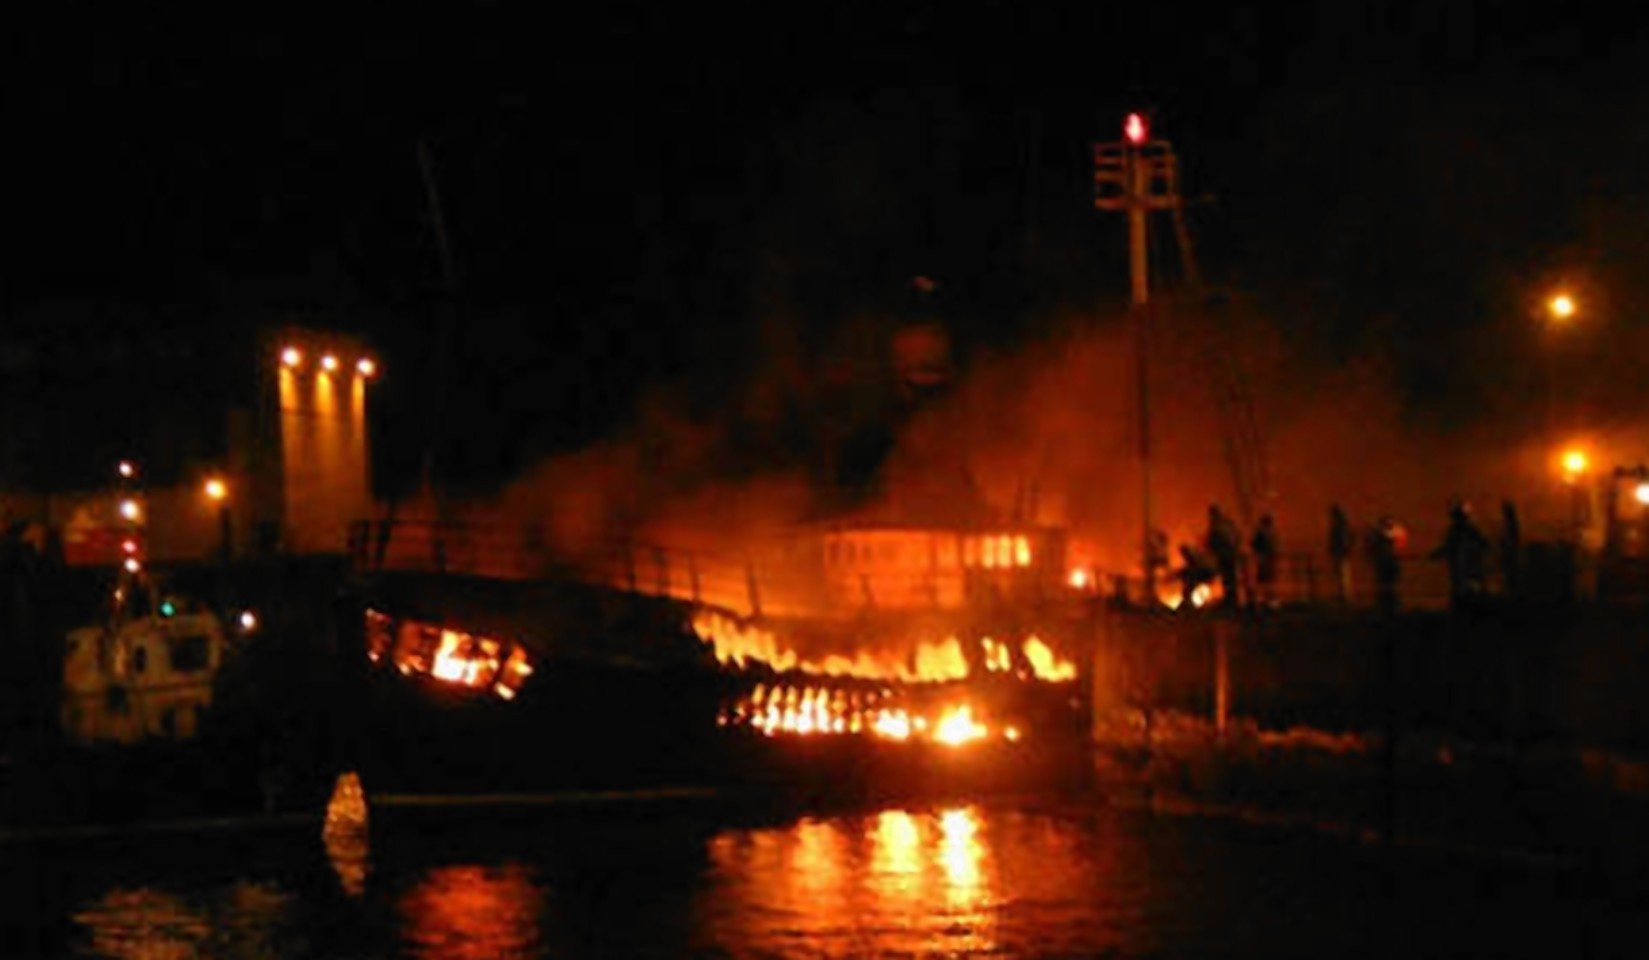 A maritime response team could soon be based in Peterhead. Pictured: A fire on a north-east boat several years ago.